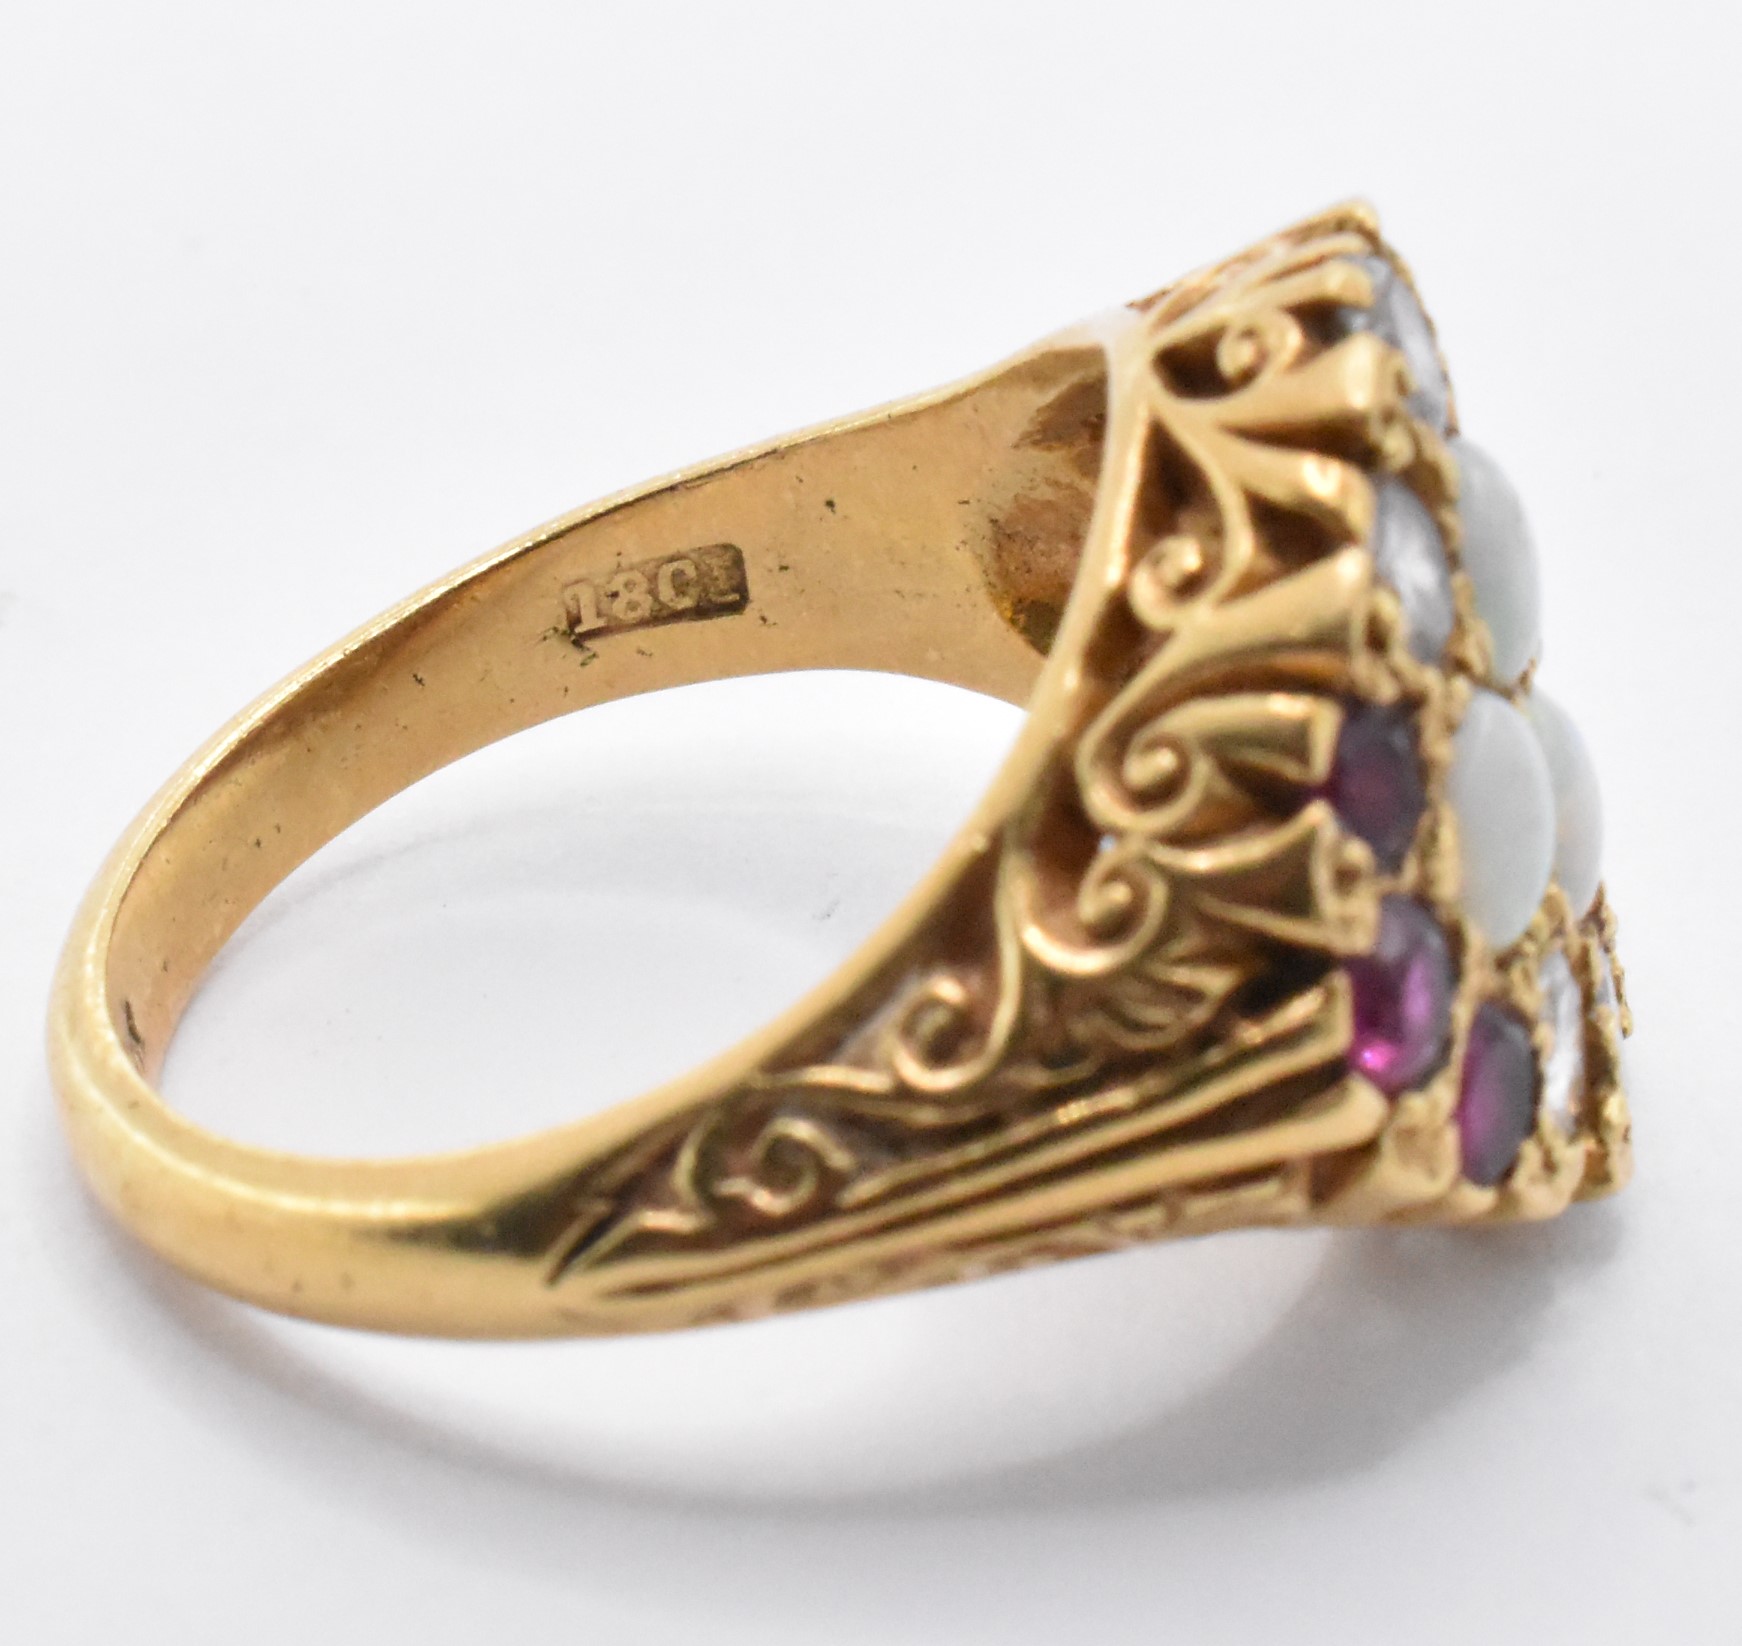 18CT GOLD OPAL DIAMOND & RUBY RING - Image 5 of 7